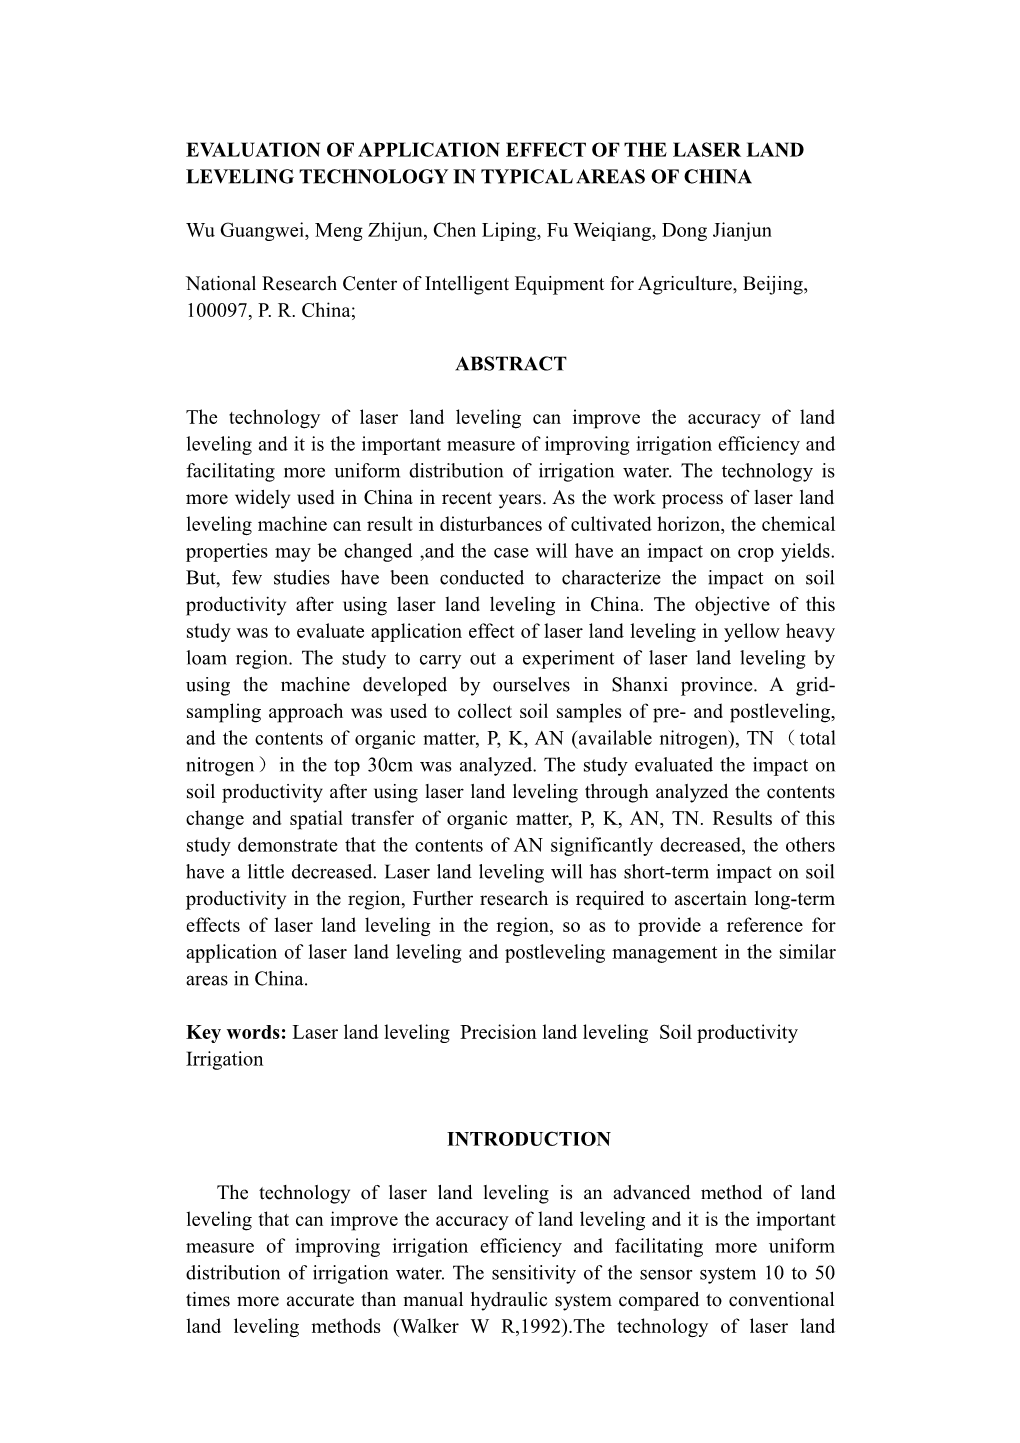 Evaluation of Application Effect of the Laser Land Leveling Technology in Typical Areas of China